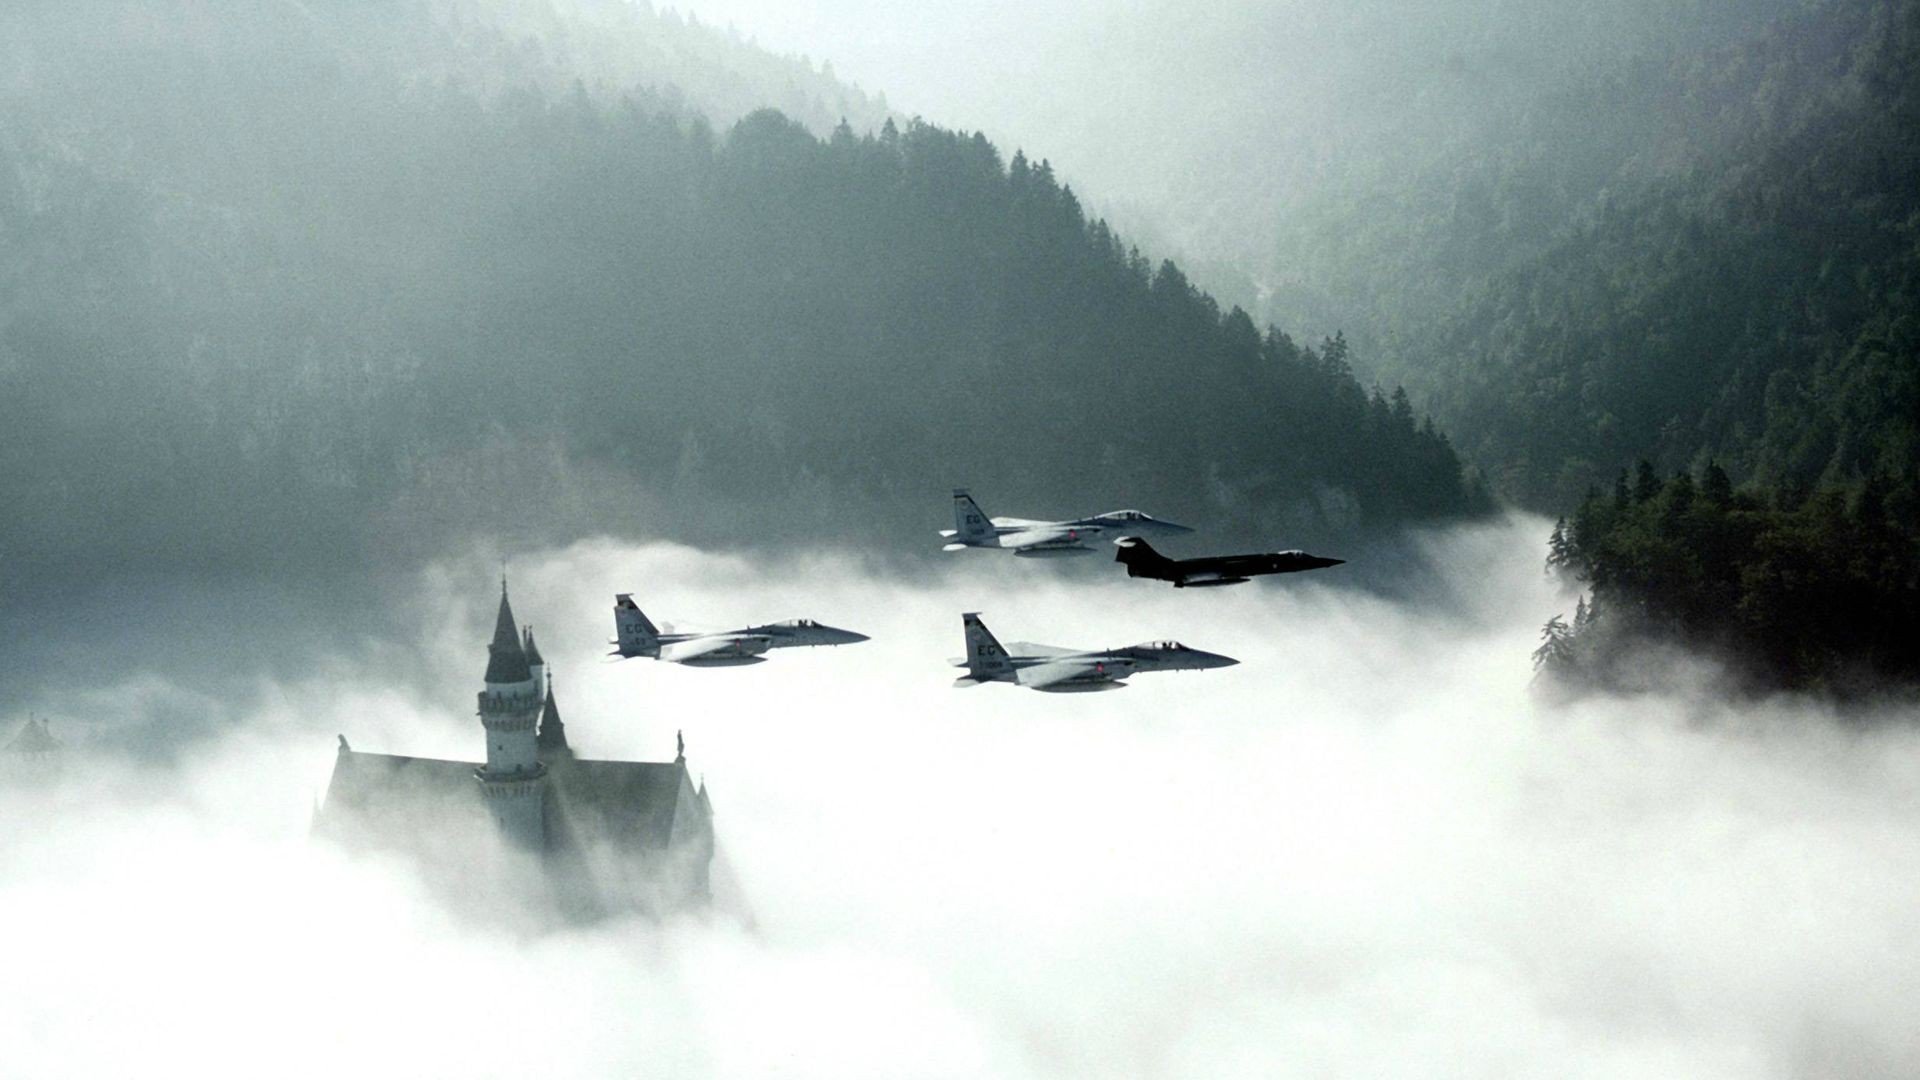 mountains, Clouds, Castles, Forests, Mist, Jet, Aircraft Wallpaper